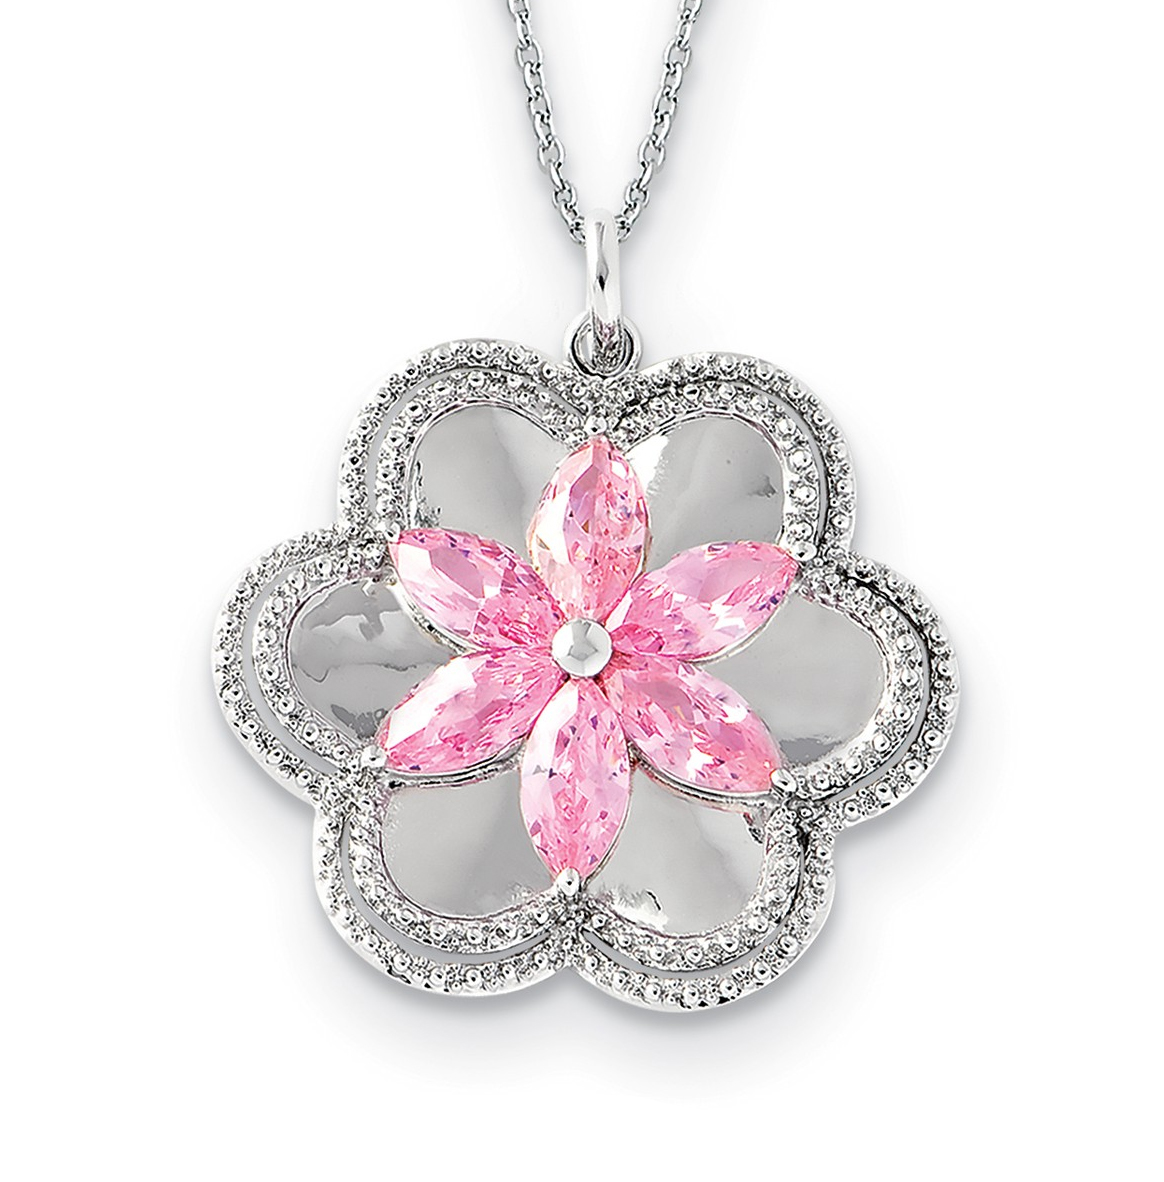   'Pretty In Pink' Flower CZ Pendant Necklace, Rhodium-Plated Sterling Silver, 18